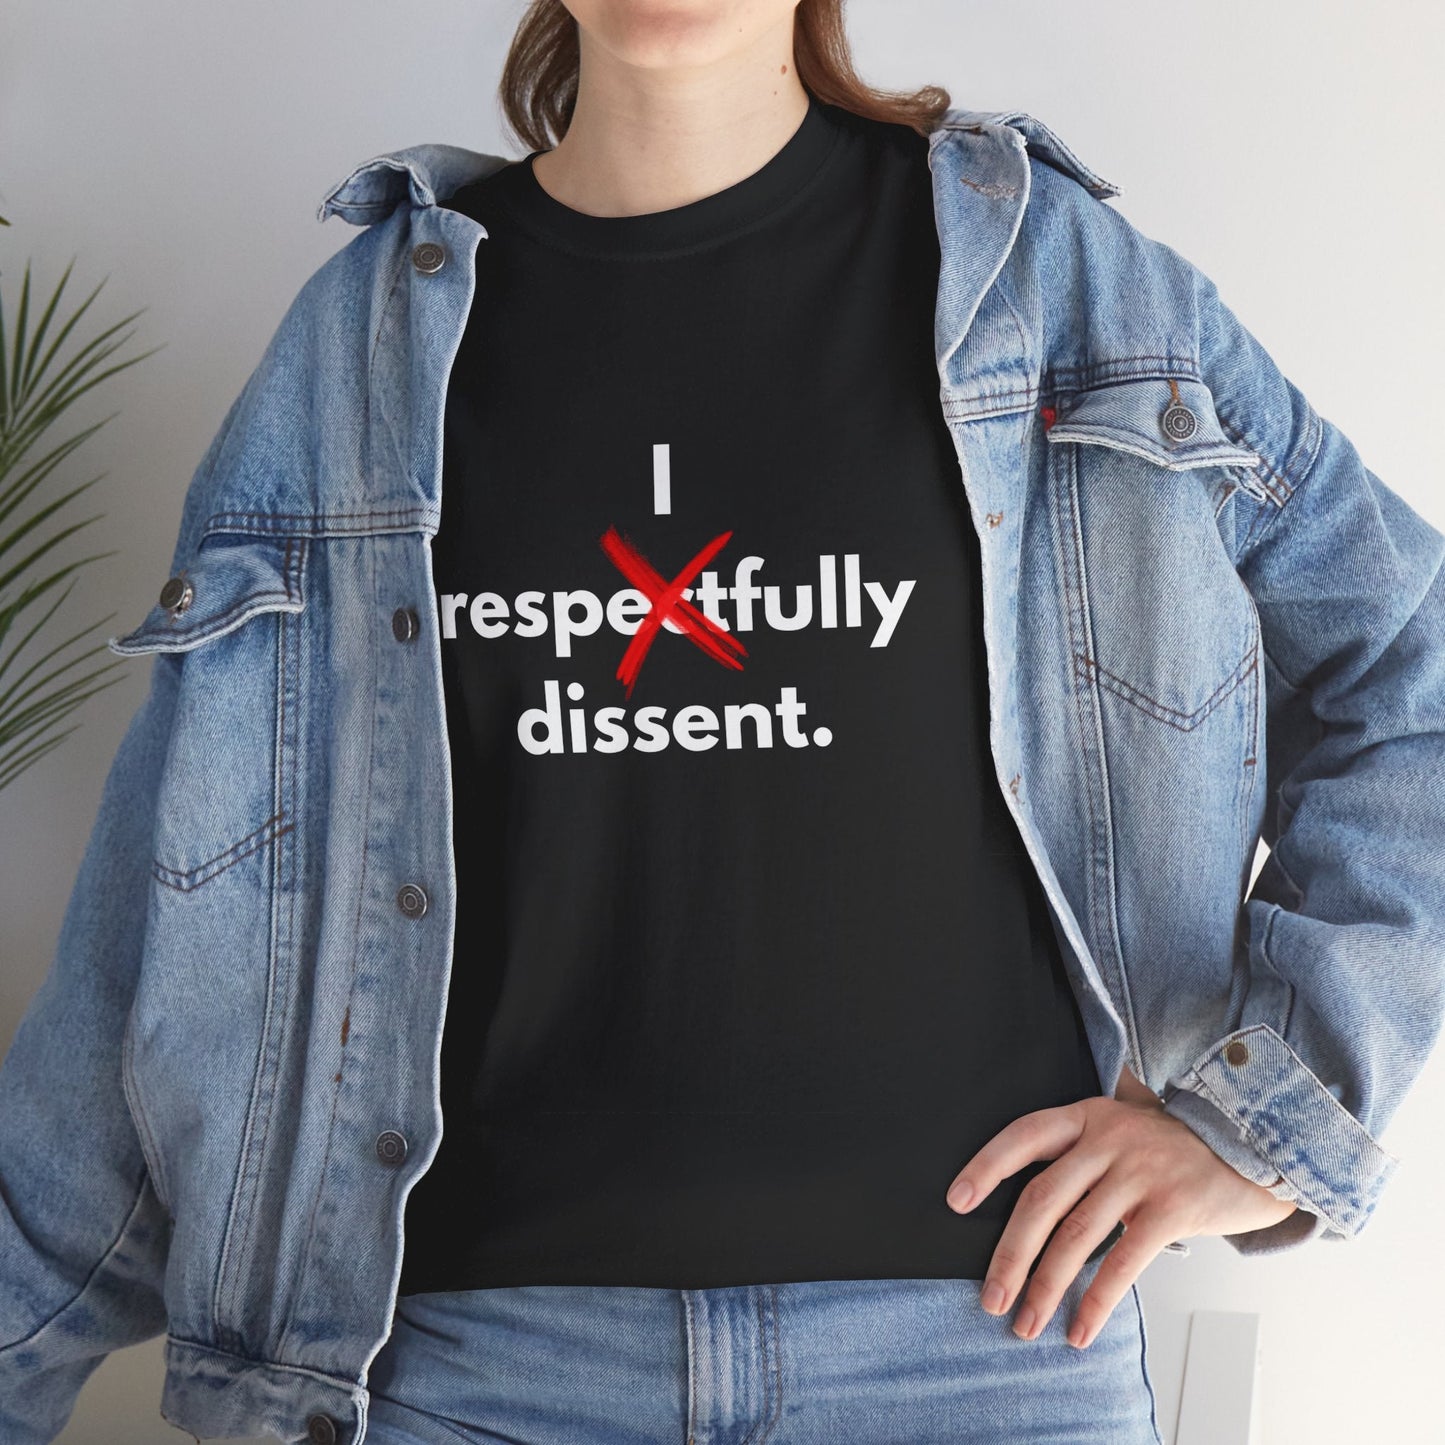 I (not) Respectfully Dissent, SCOTUS Rulings, Justice, Not Above the Law, Womens Rights - FlooredByArt